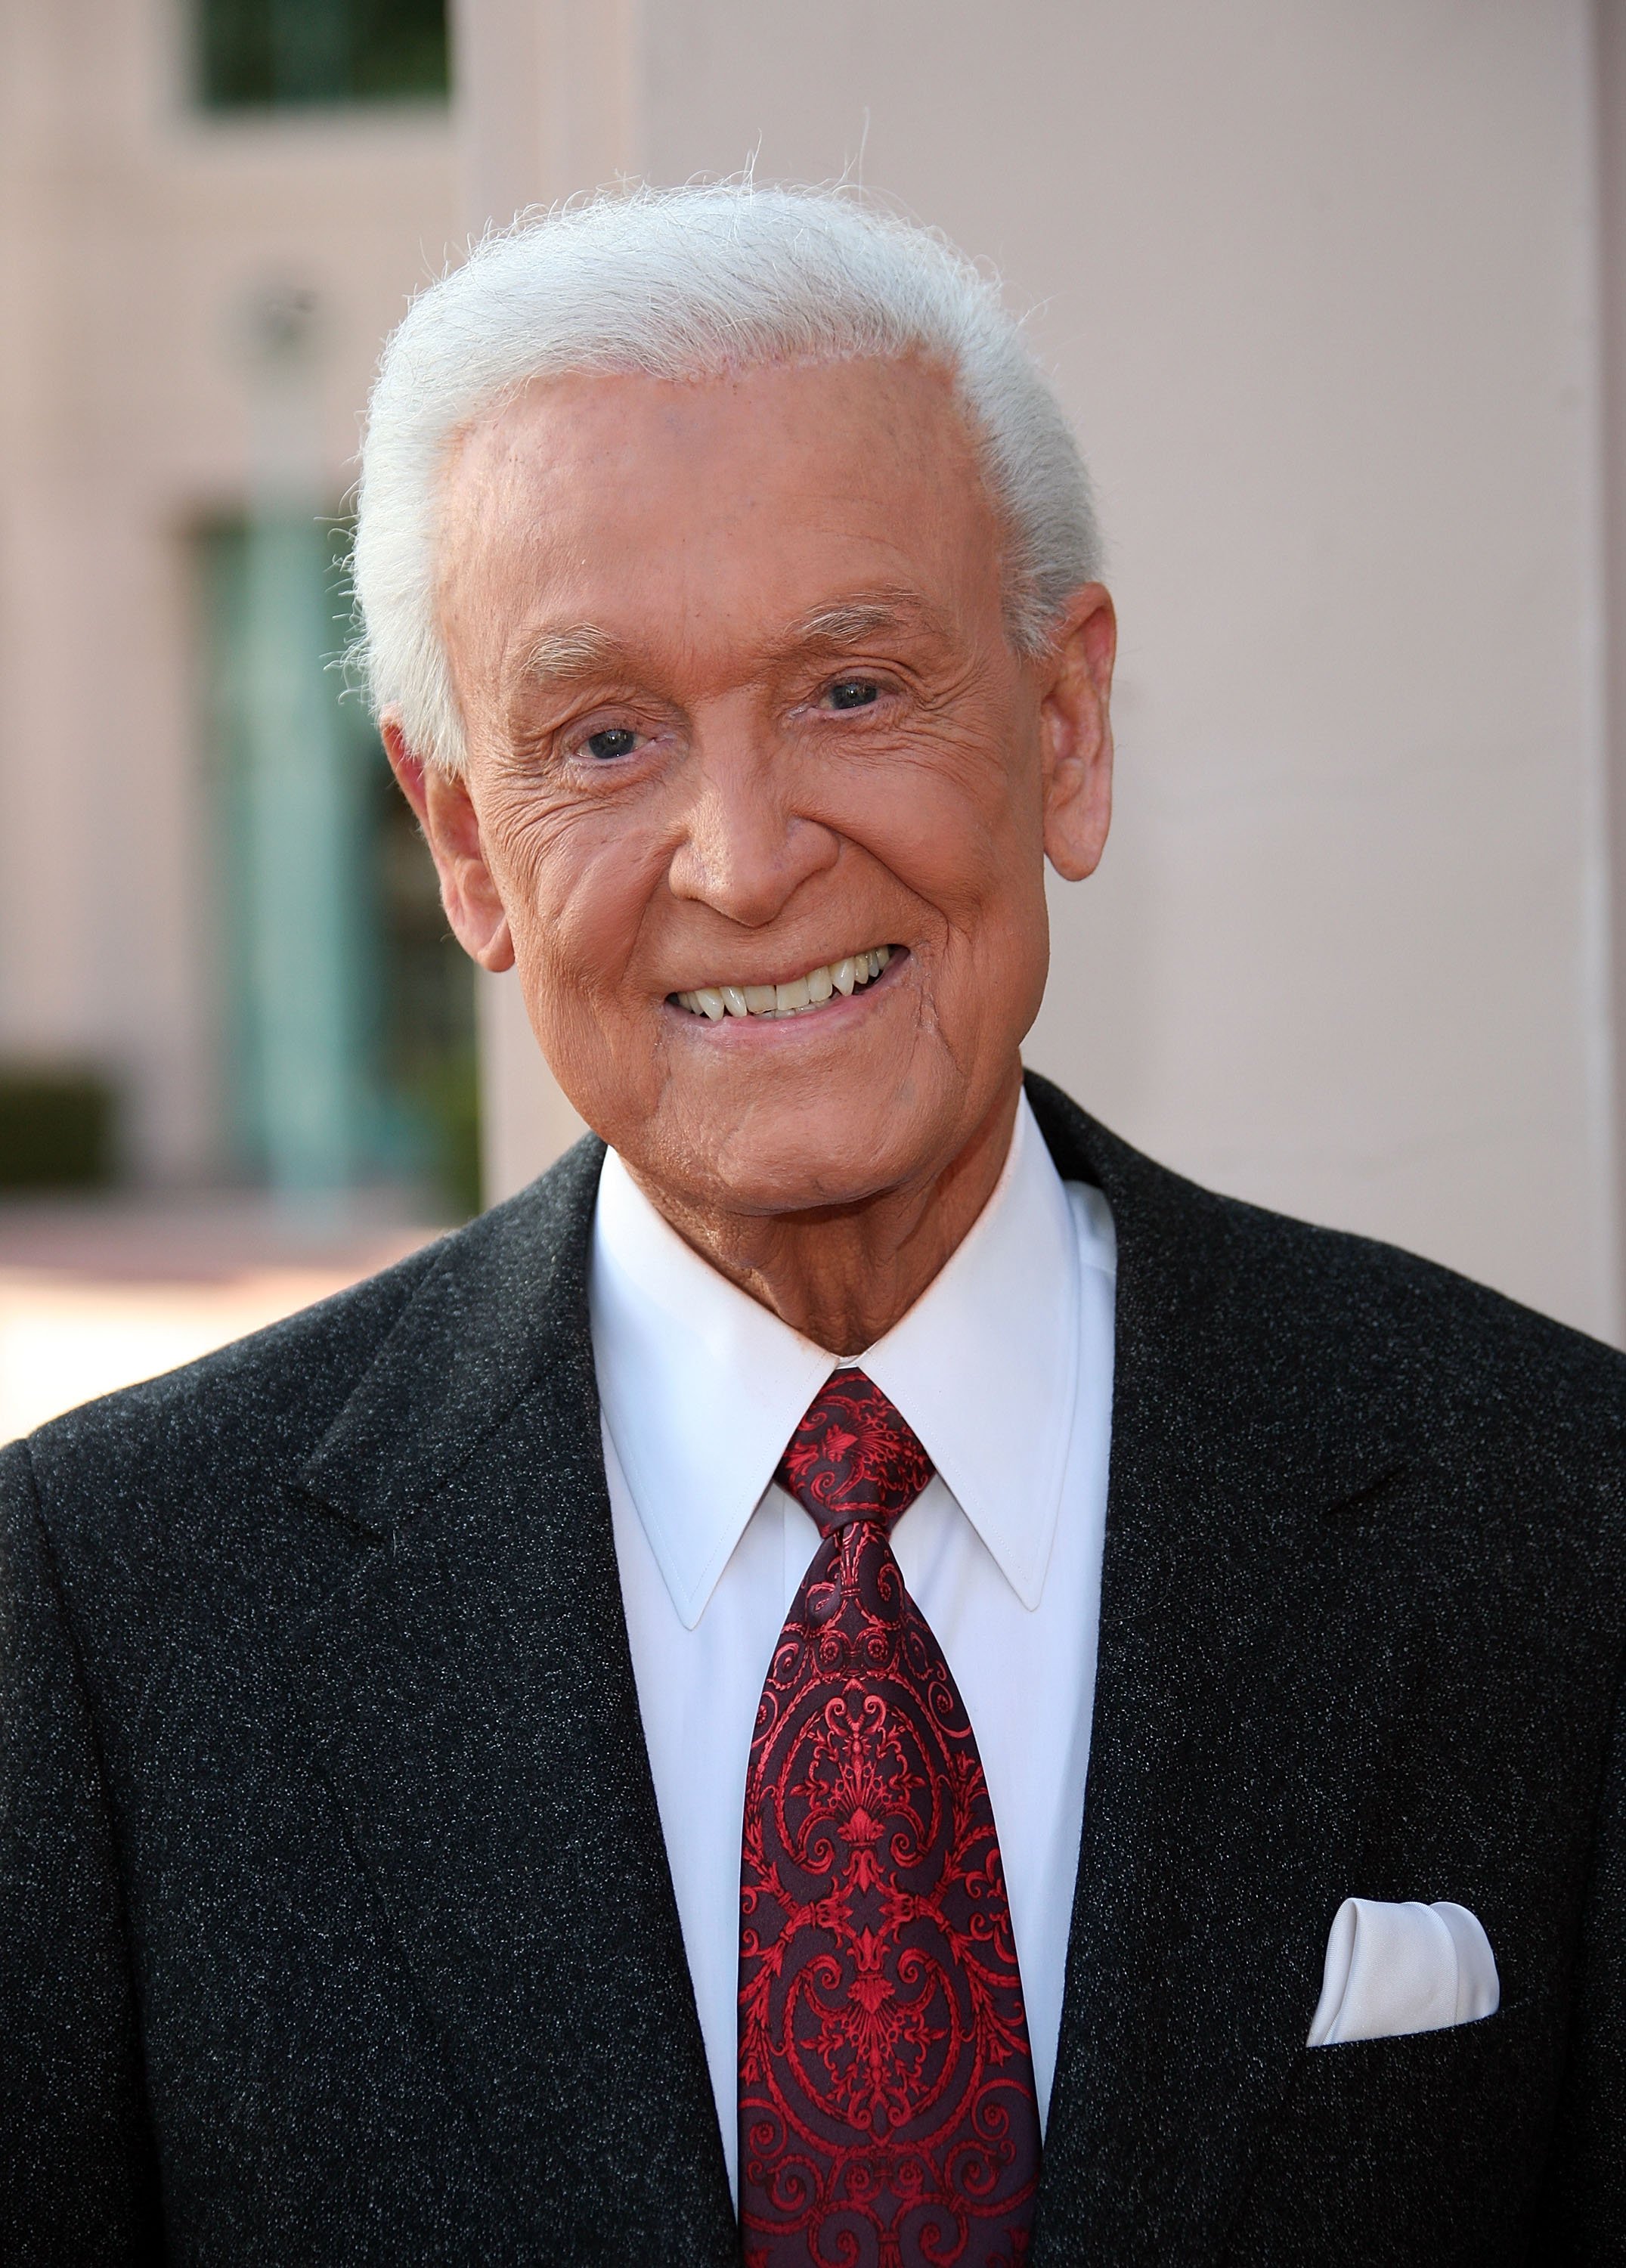 Bob Barker attends An Evening With Bob Barker at The Leonard Goldenson Theater May 7, 2007 | Photo: GettyImages 